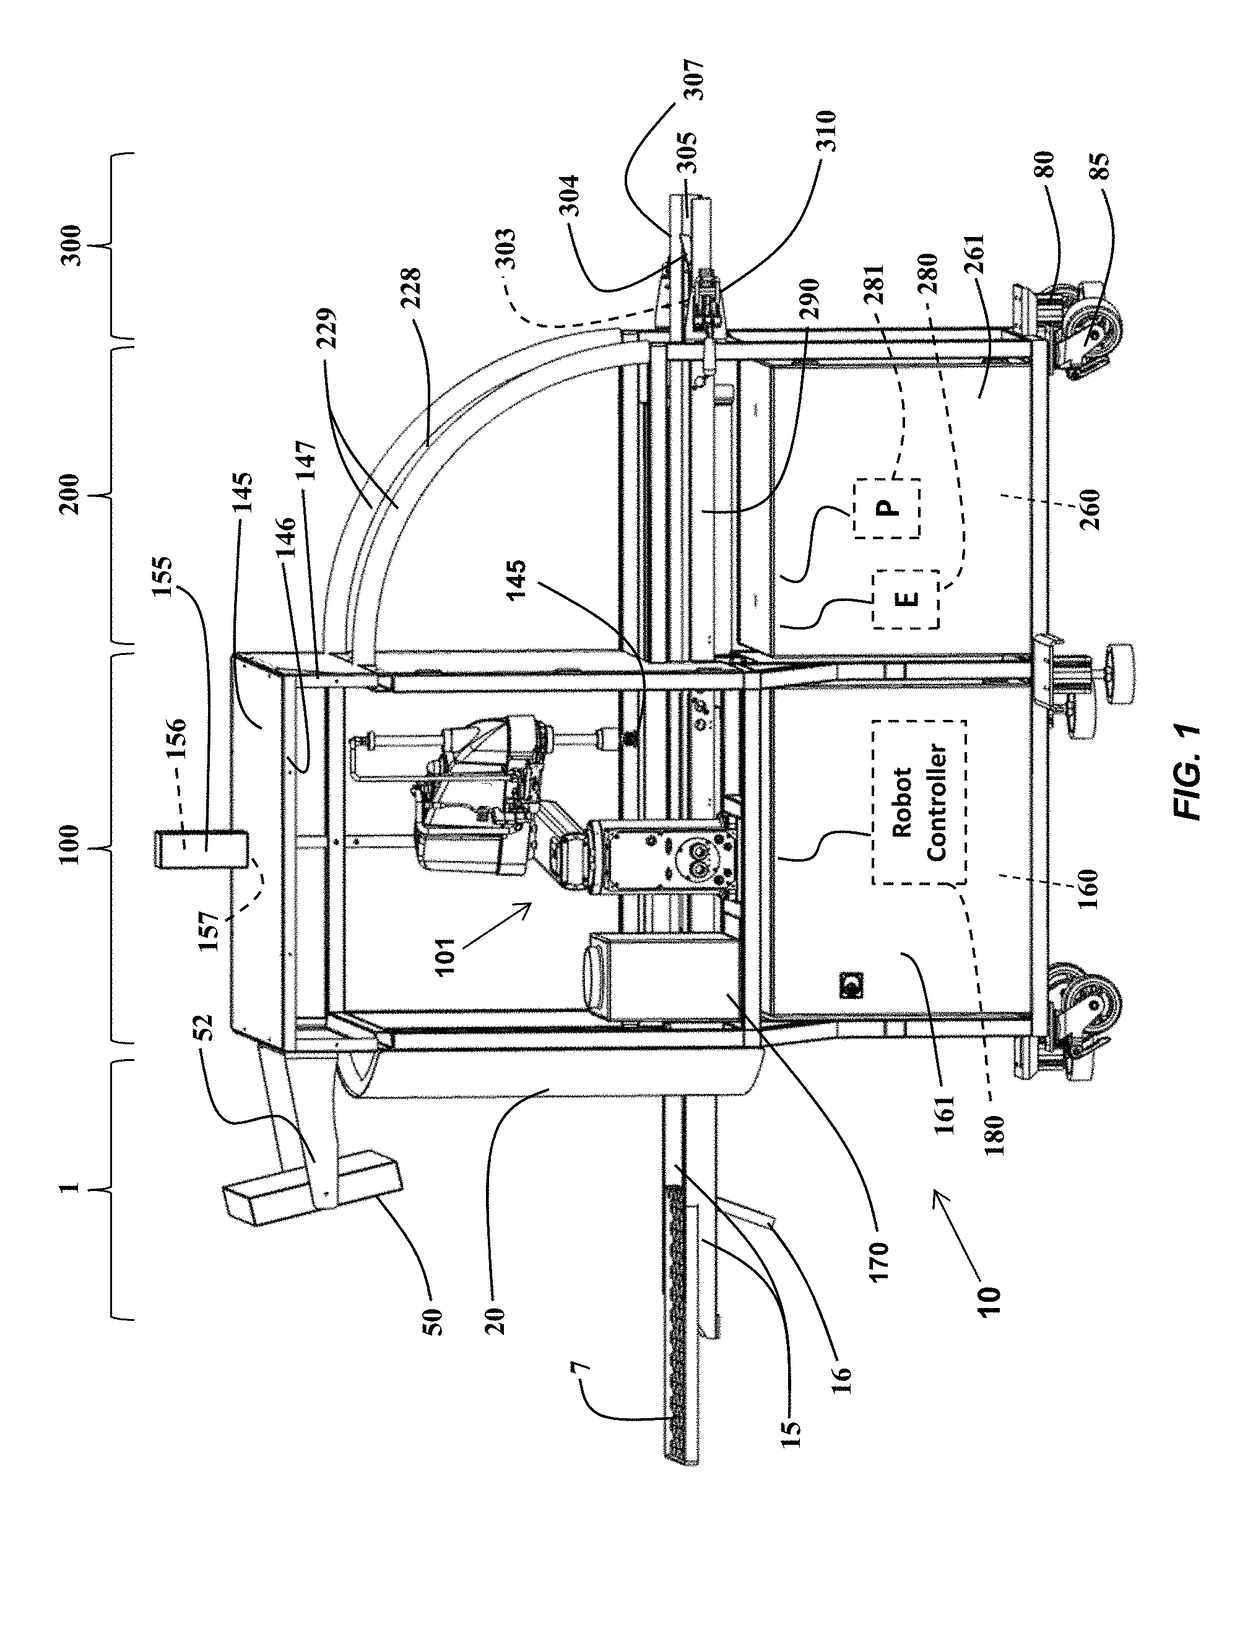 Egg Candling and Relocation Apparatus for Use with In ovo Injection Machines